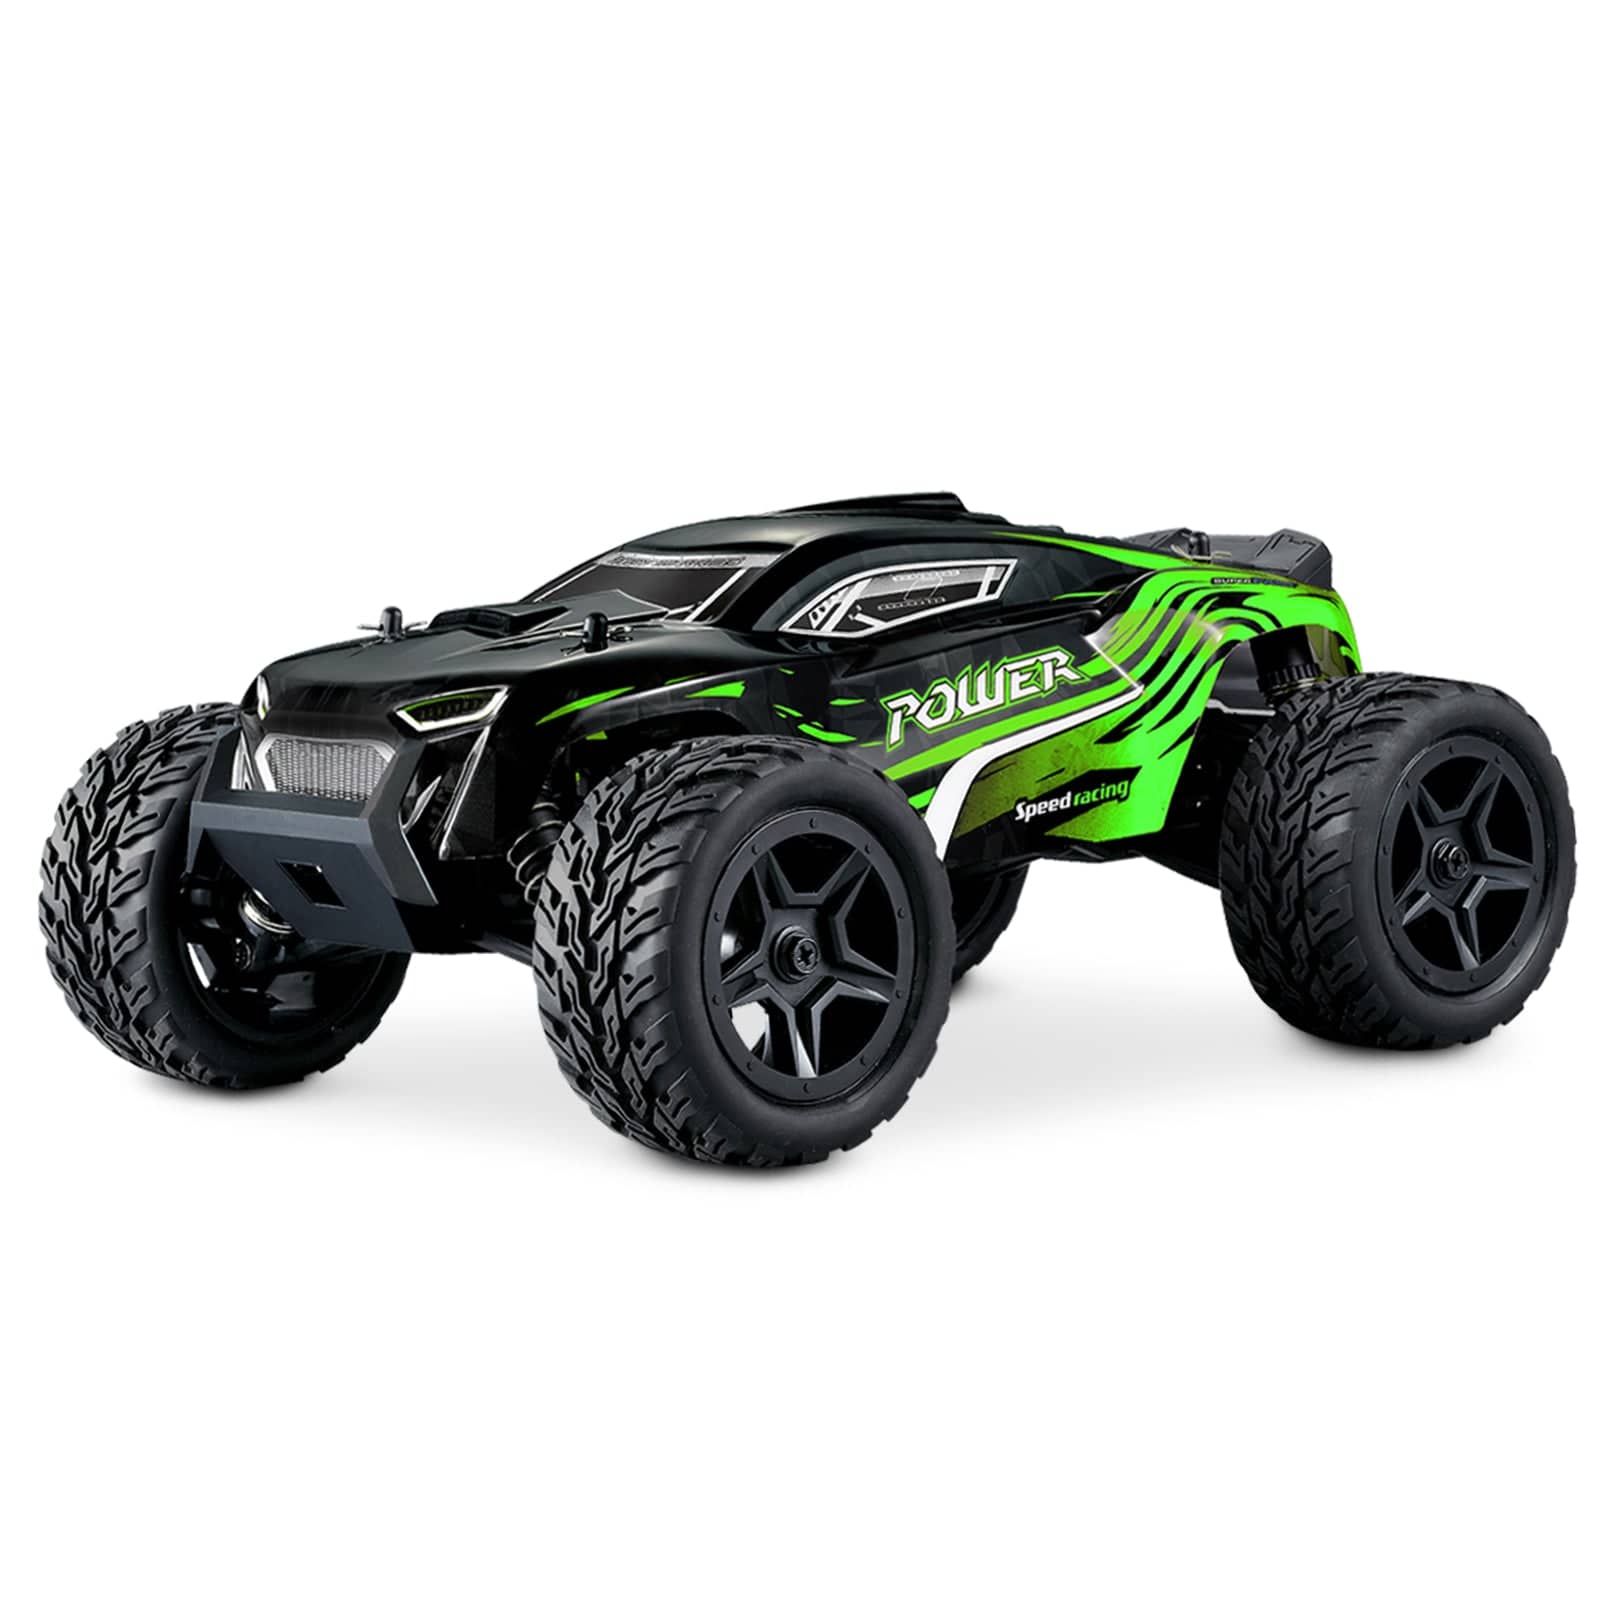 Hosim 1:14 Scale Radio Controlled Car RC Monster Truck Buggy G172 Green 2 Set Batteries